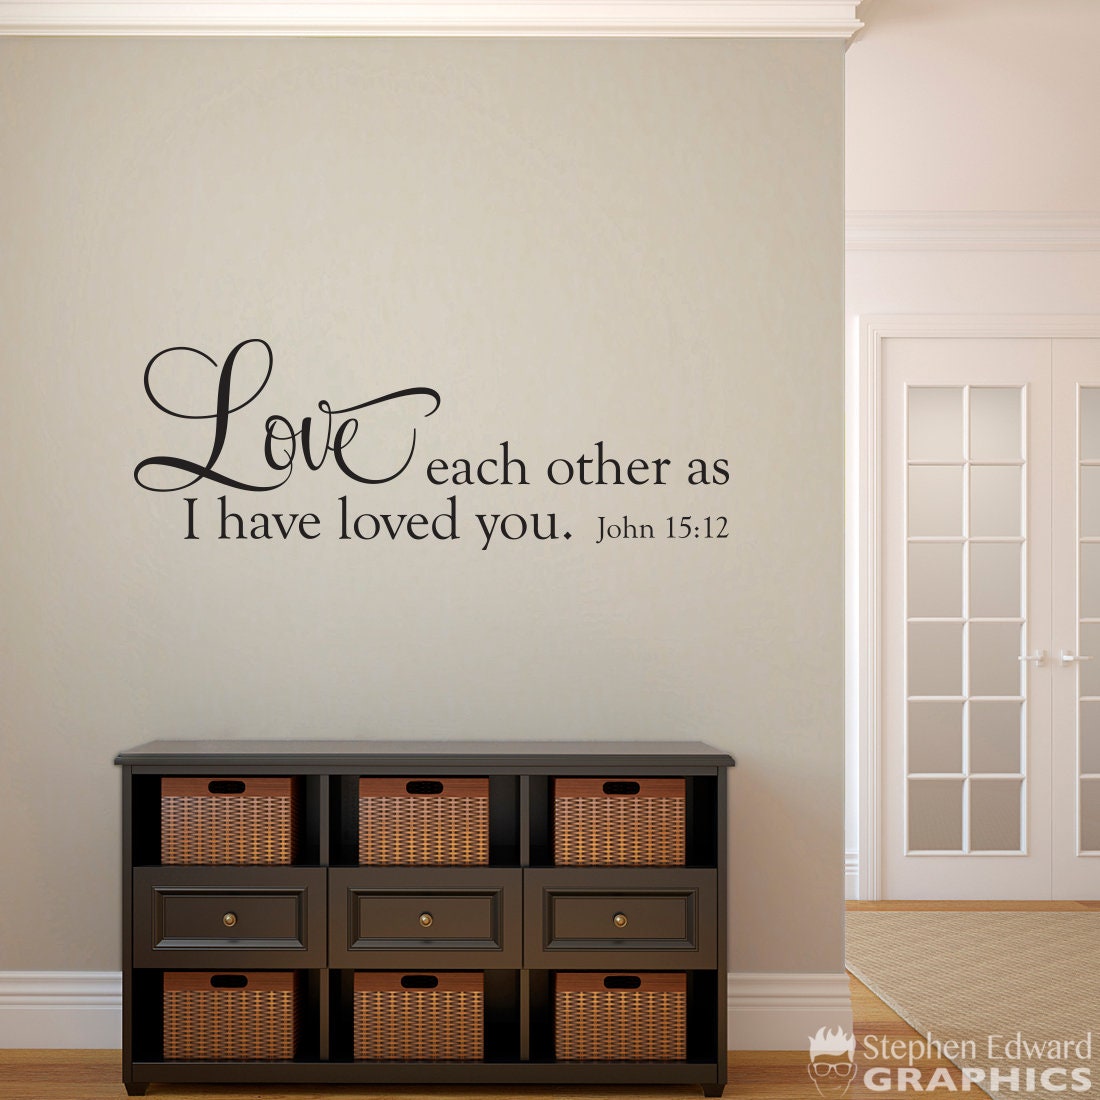 John 15:12 Decal | Scripture Wall Decal | Love Each Other as I have Love you Wall Art vinyl